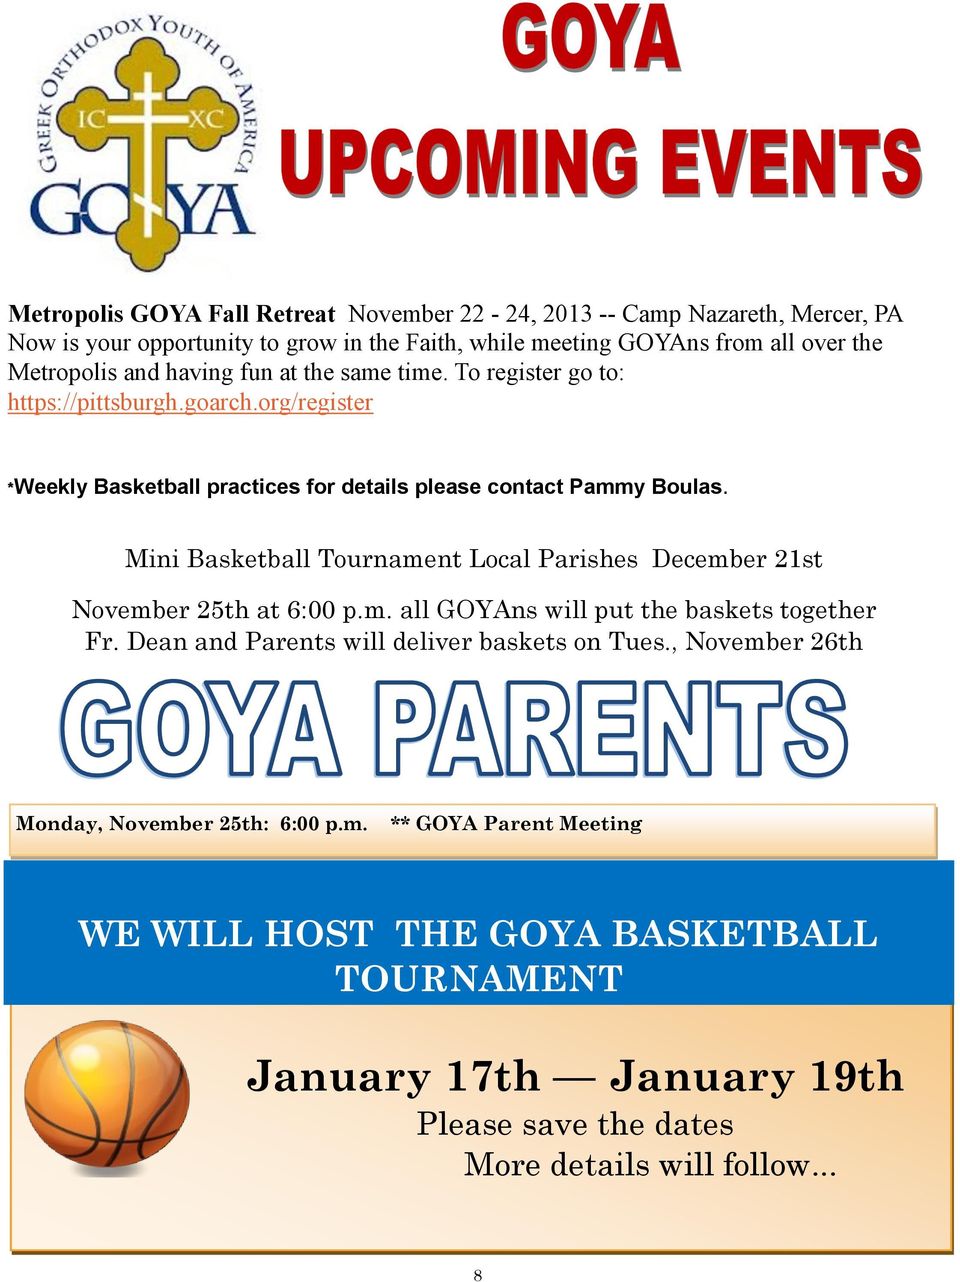 Mini Basketball Tournament Local Parishes December 21st November 25th at 6:00 p.m. all GOYAns will put the baskets together Fr. Dean and Parents will deliver baskets on Tues.